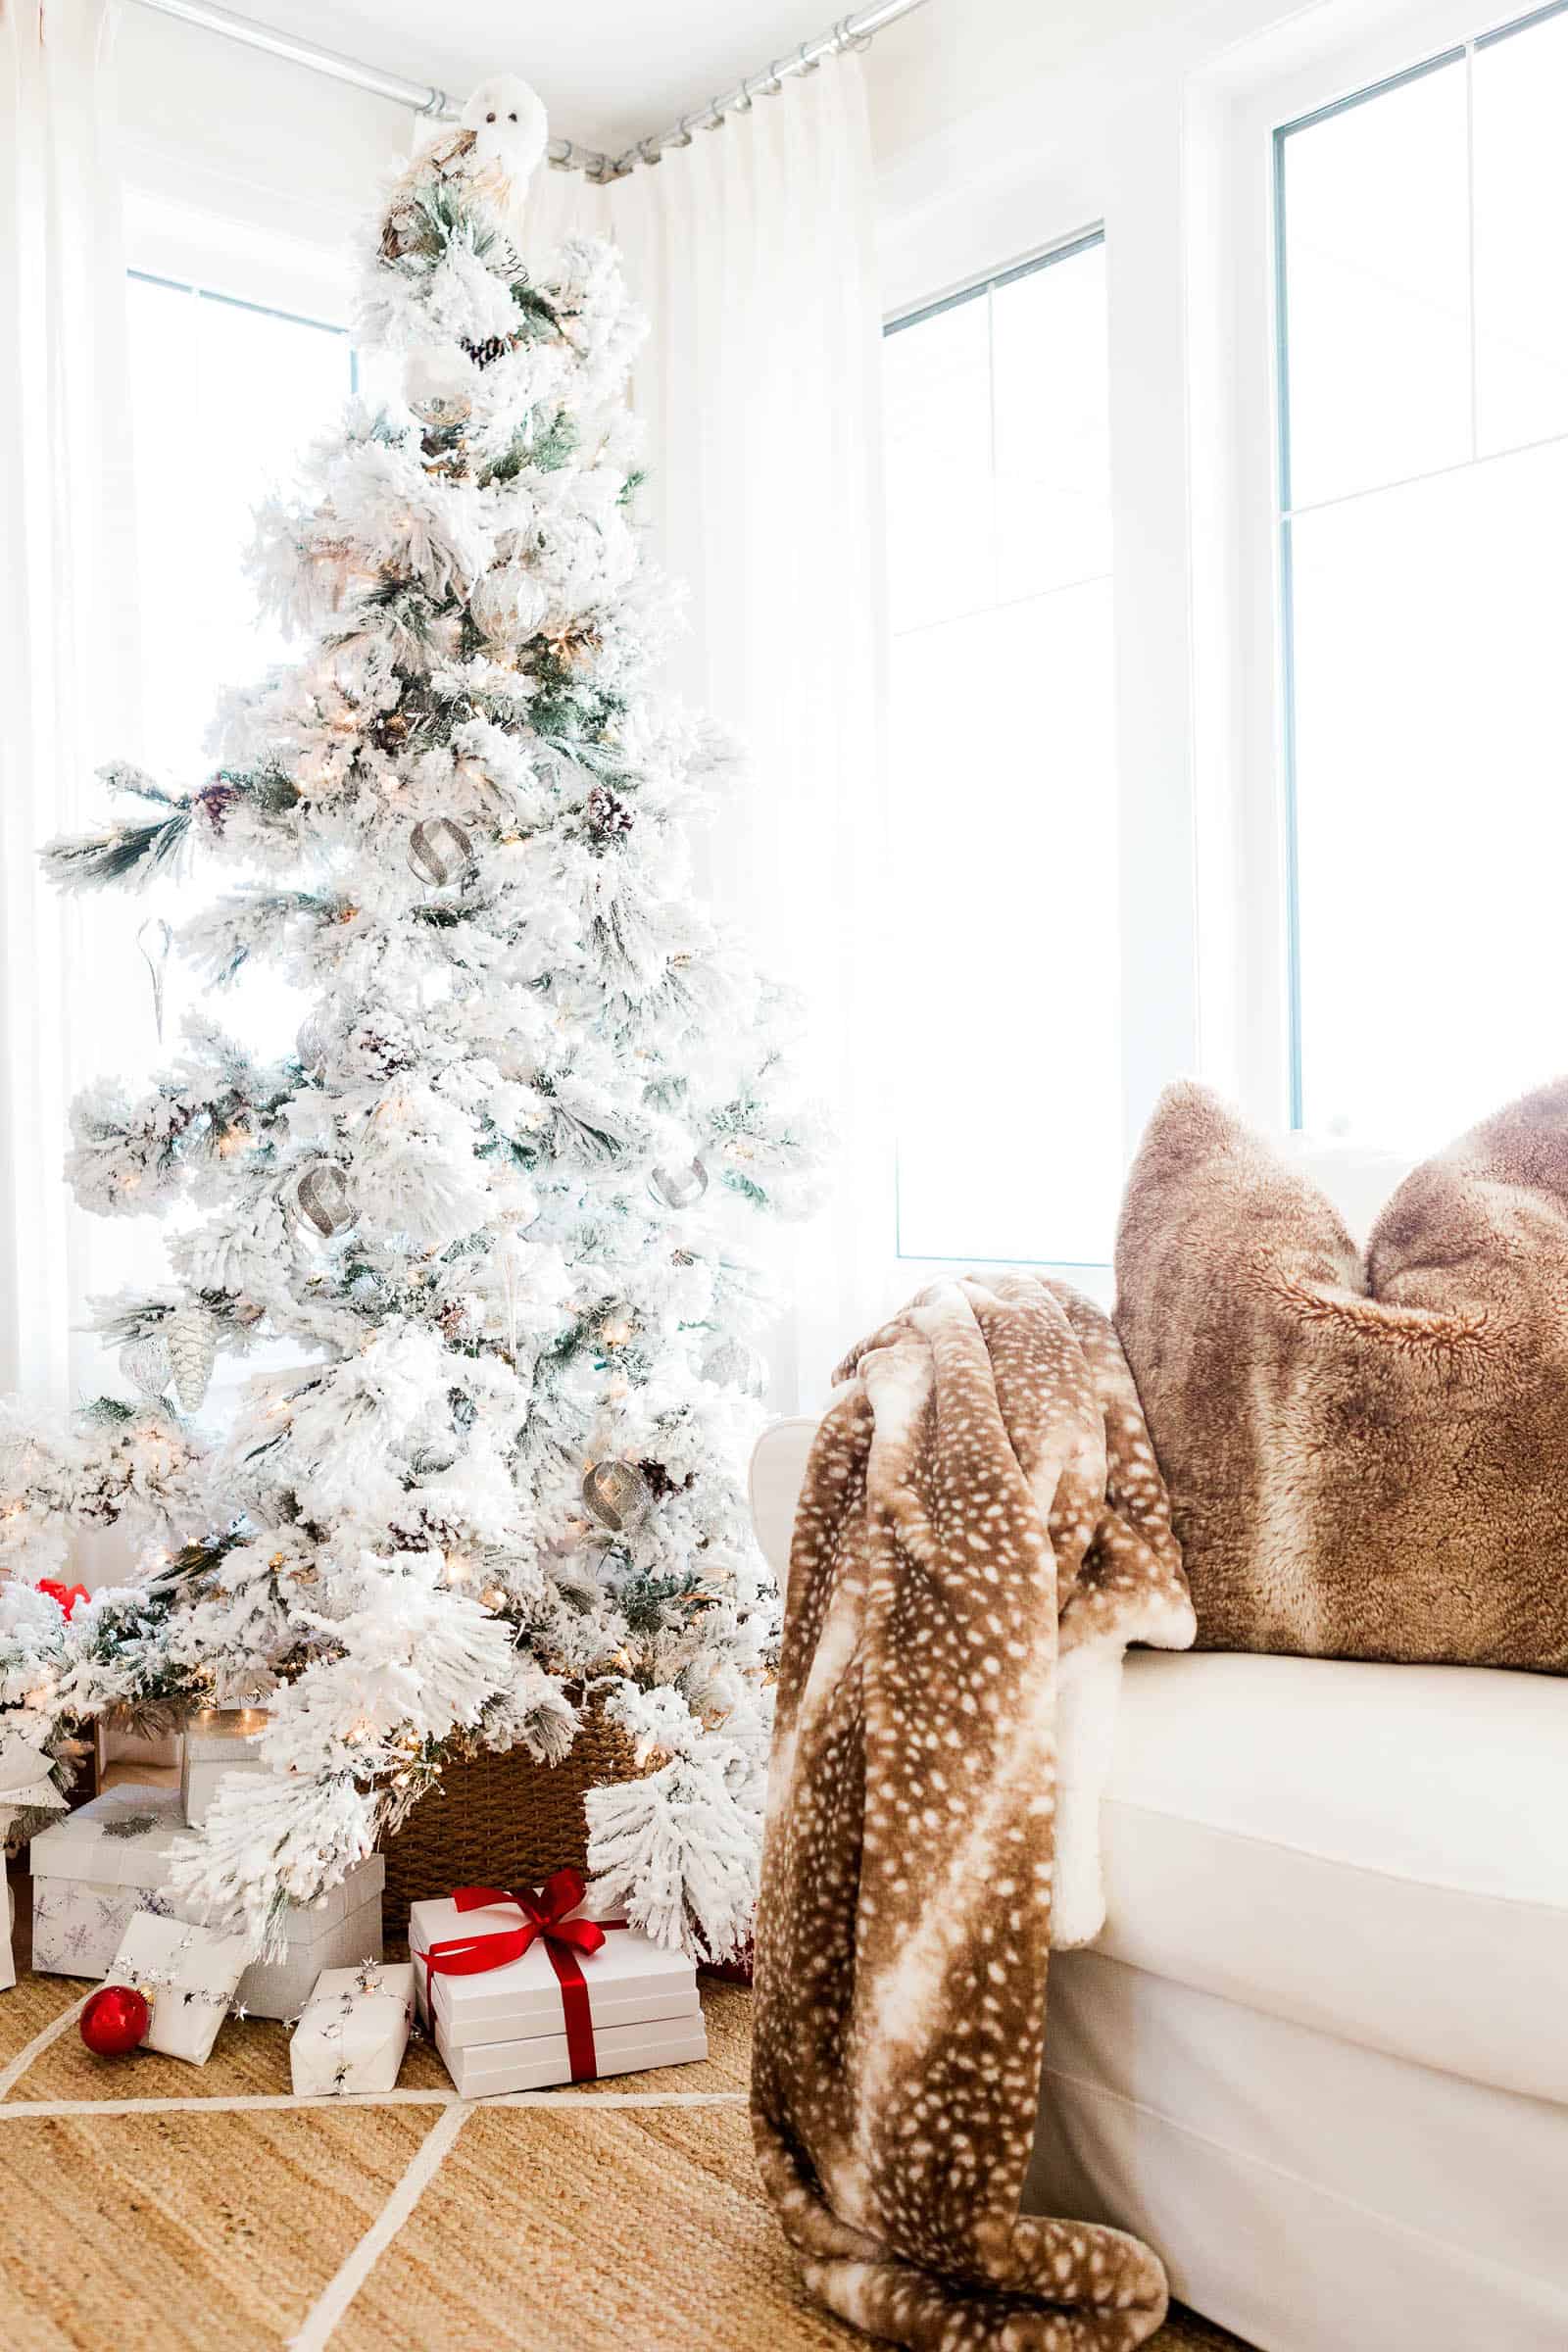 How To Stay Organized During The Holidays